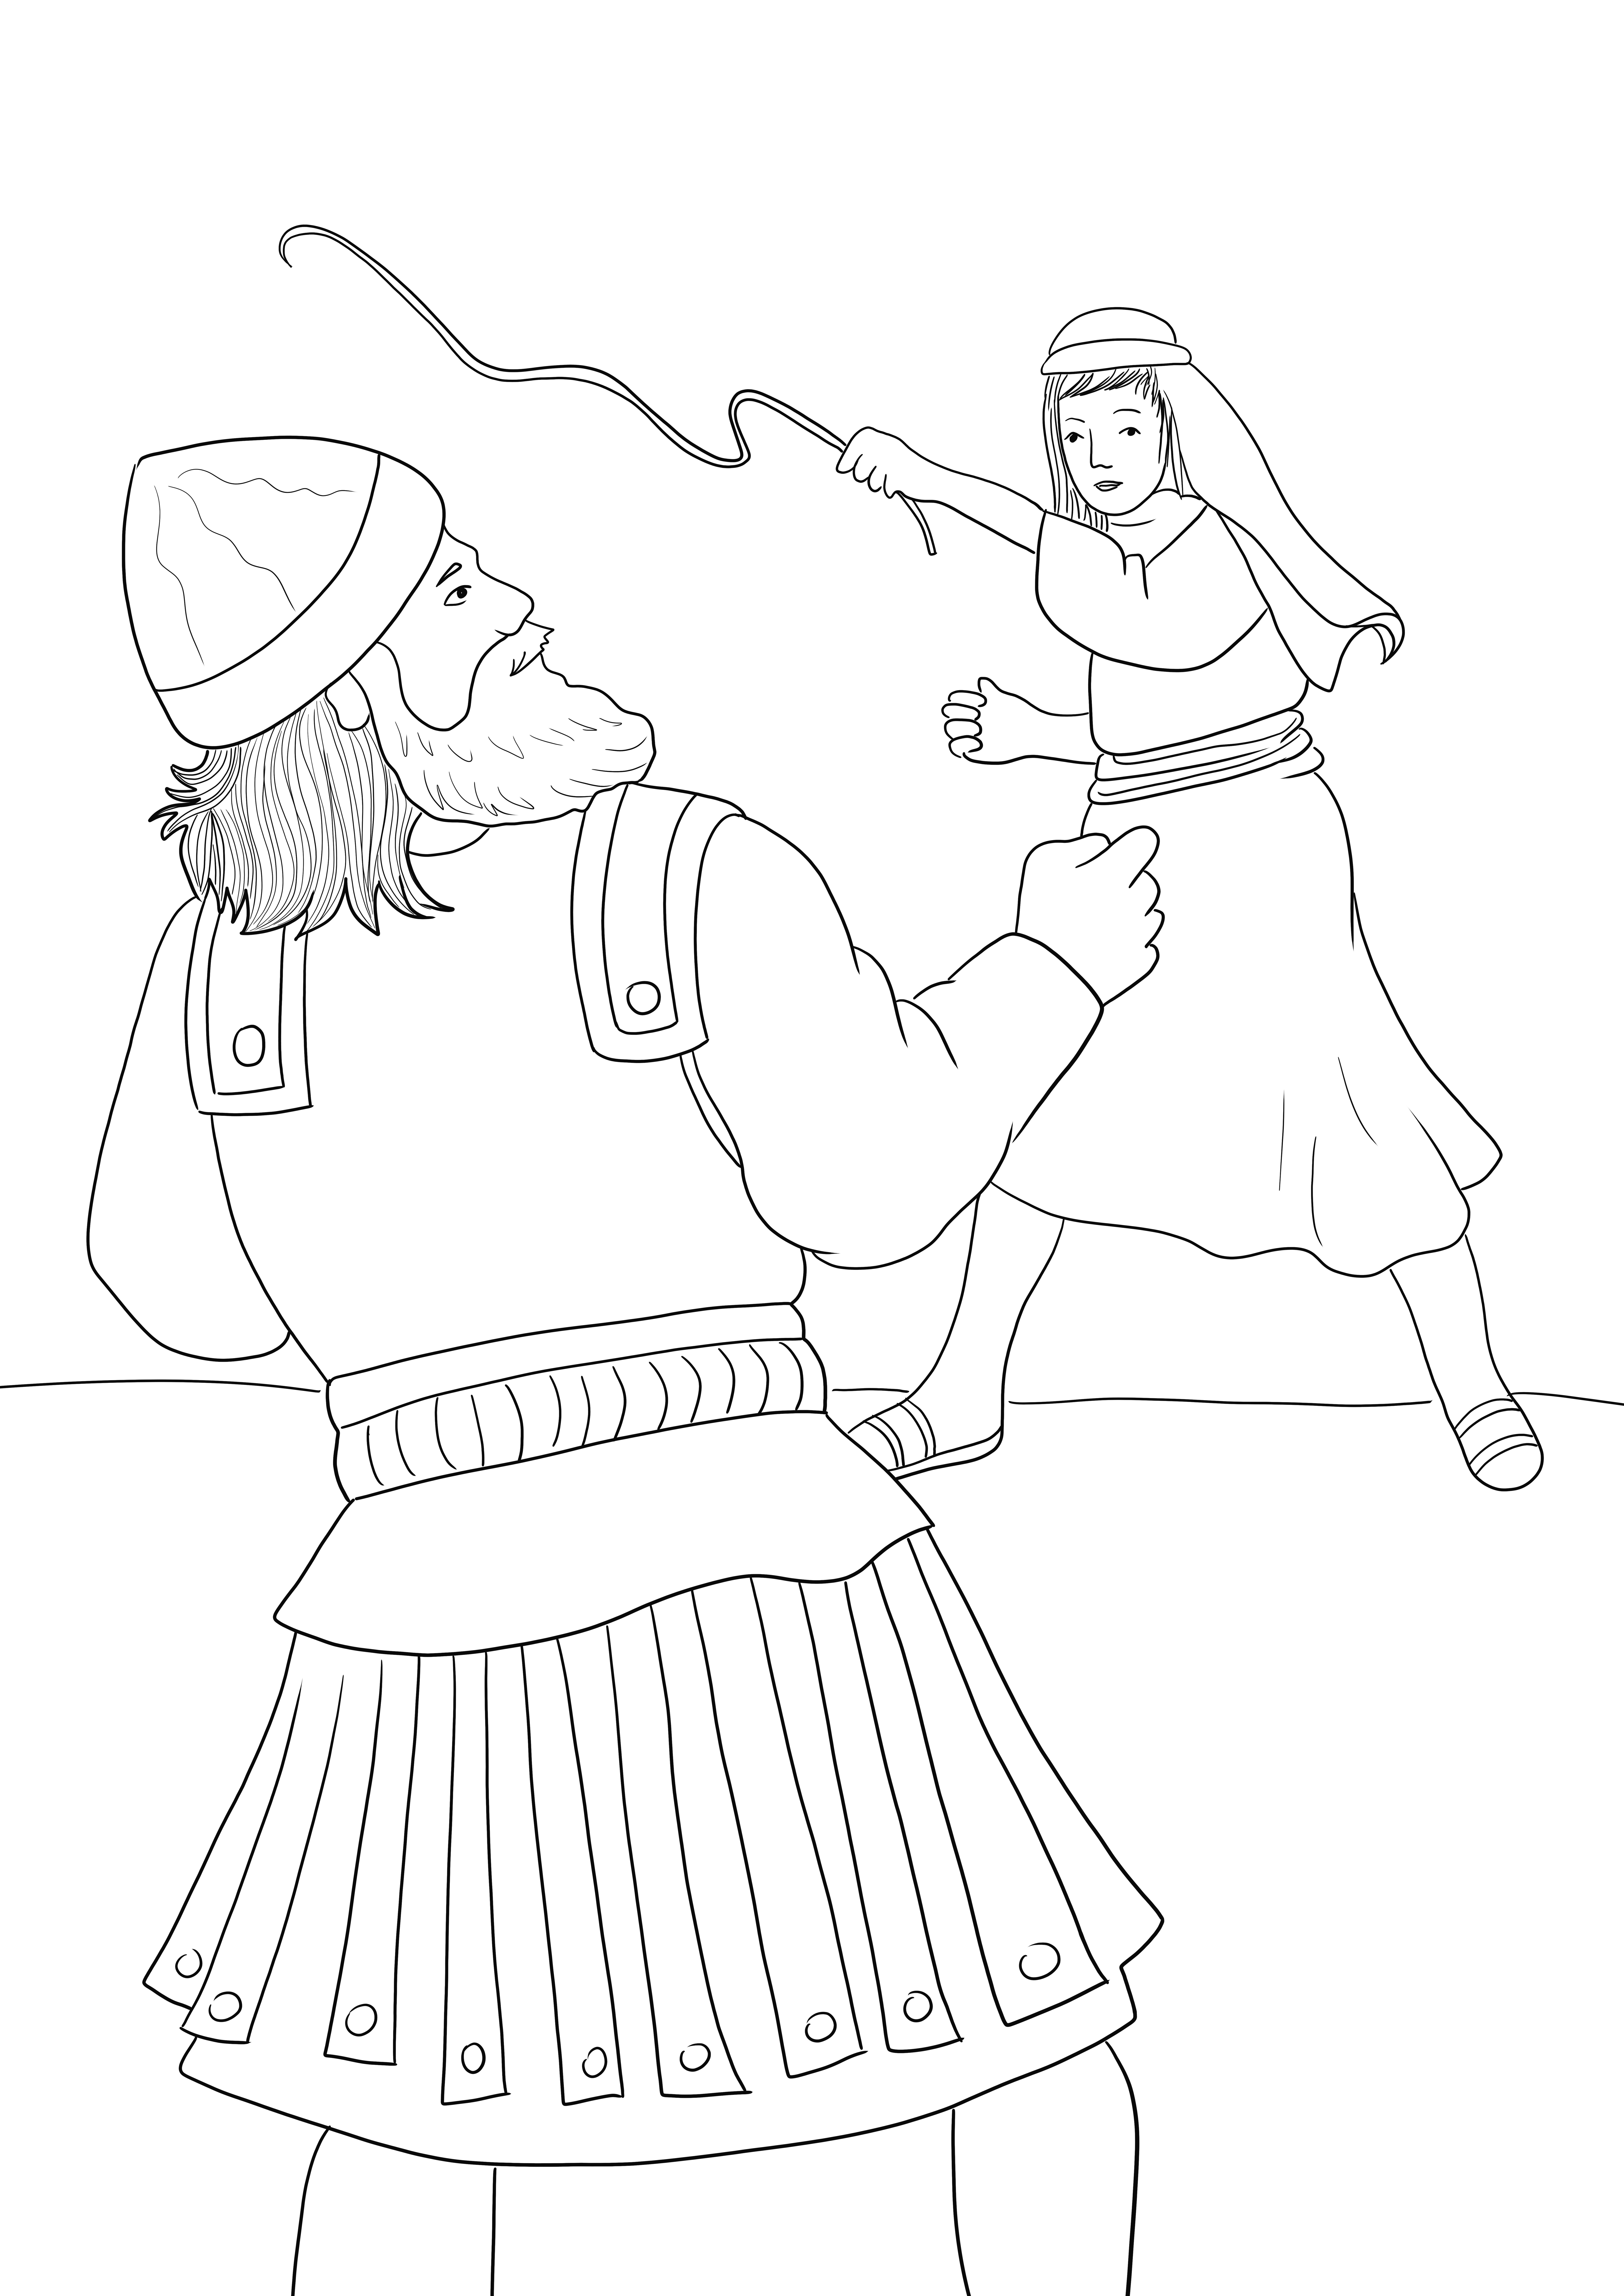 David and Goliath coloring image free to download or save for later